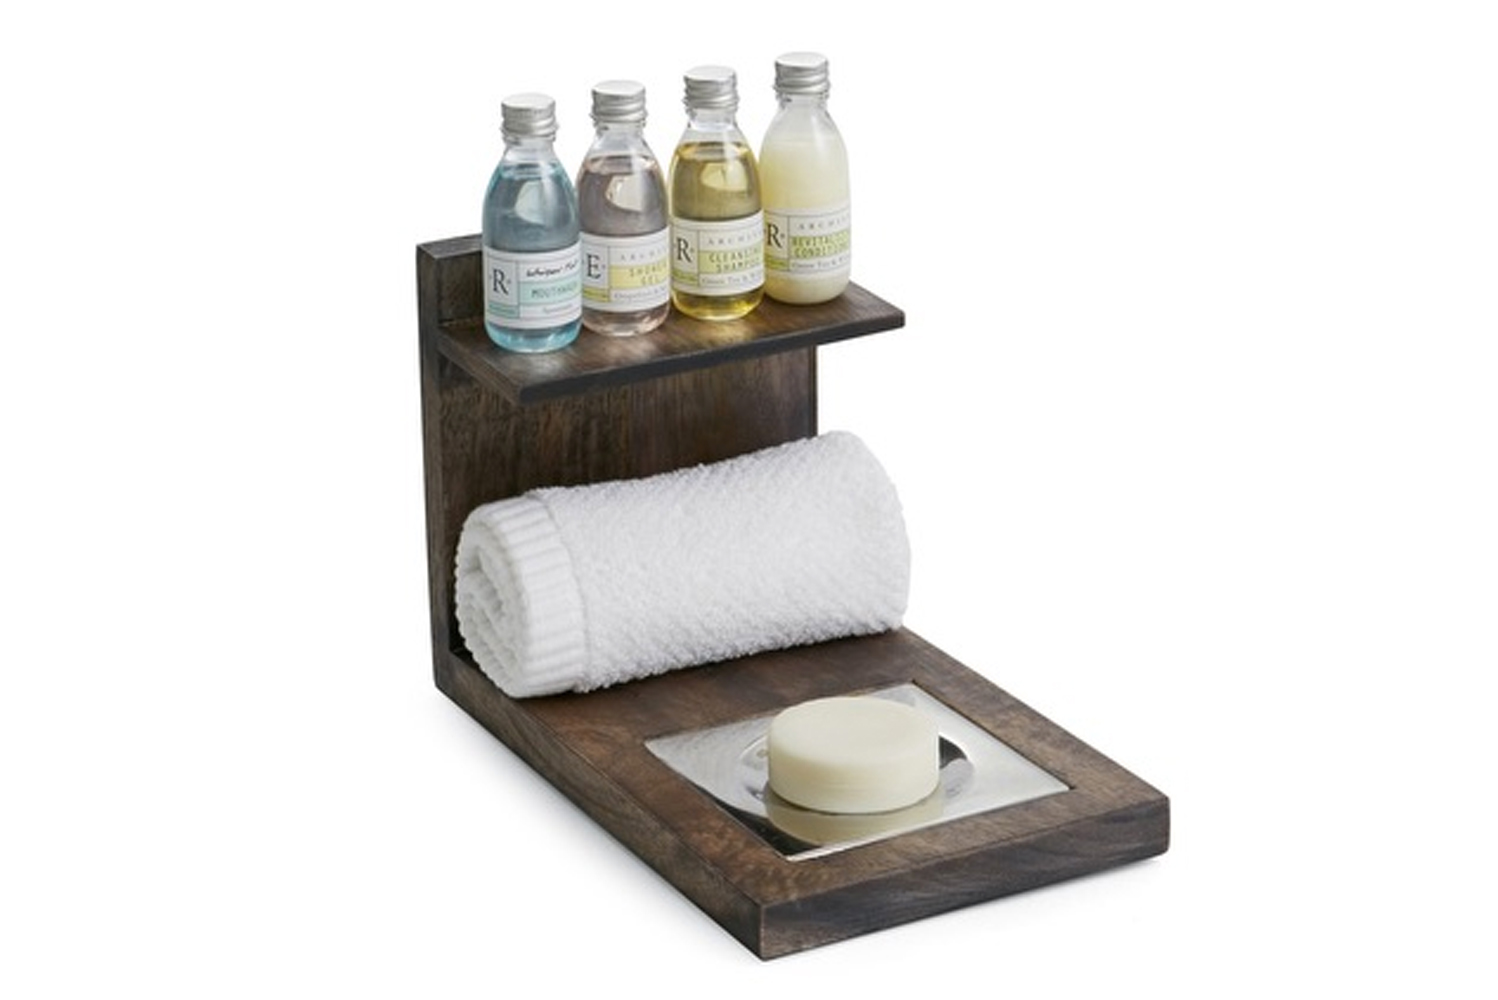  The caddy has small shelf hand towel storage and a soap dish all seamlessly integrated into one piece 